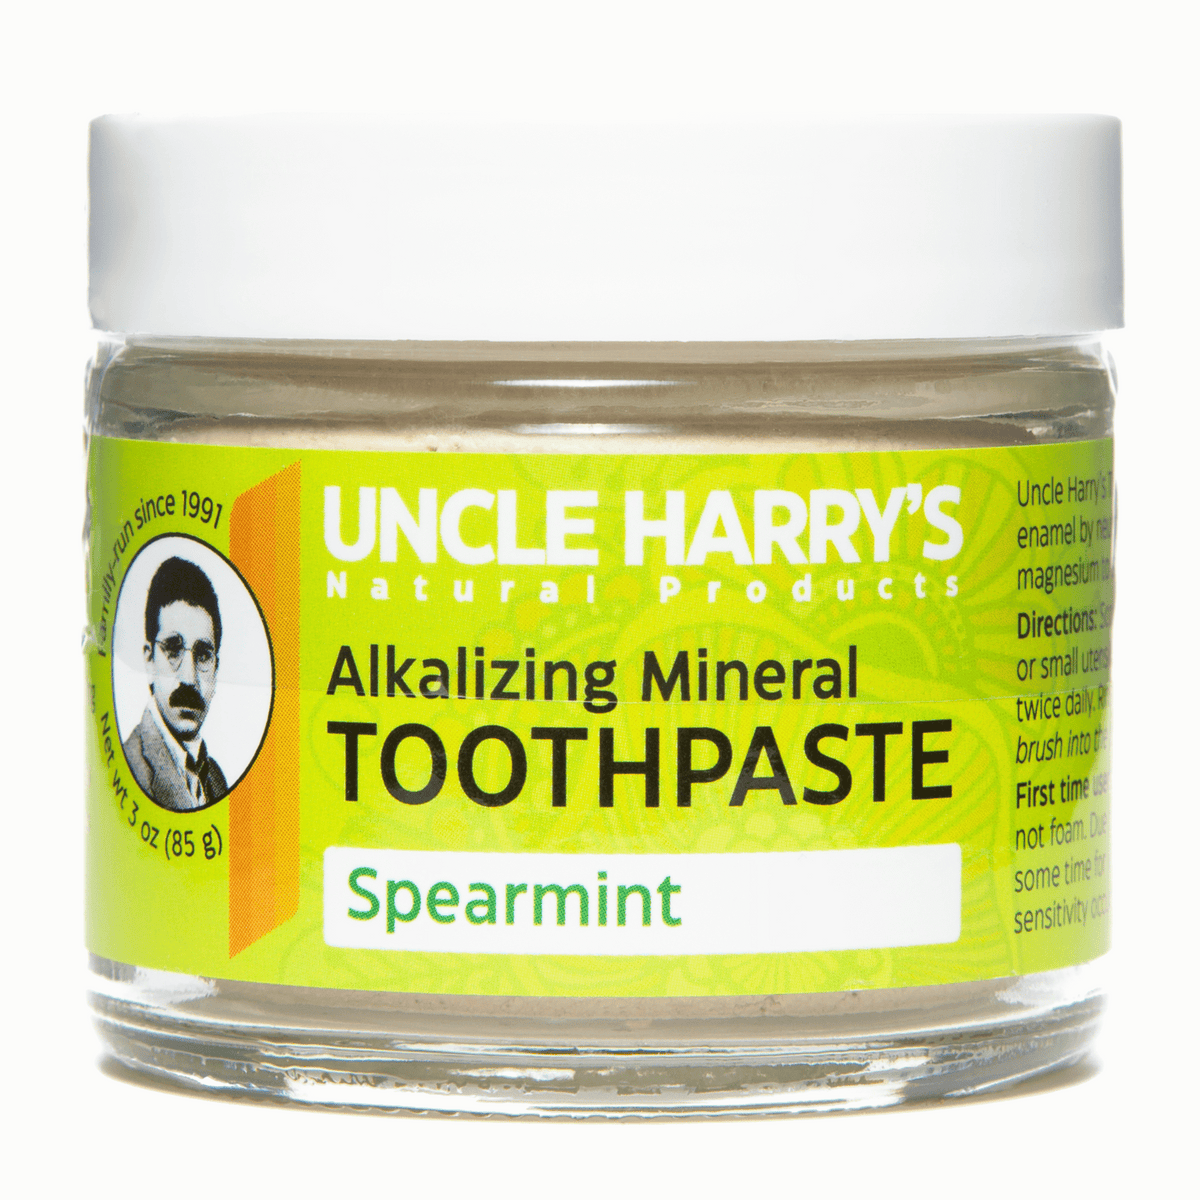 Primary Image of Spearmint Toothpaste